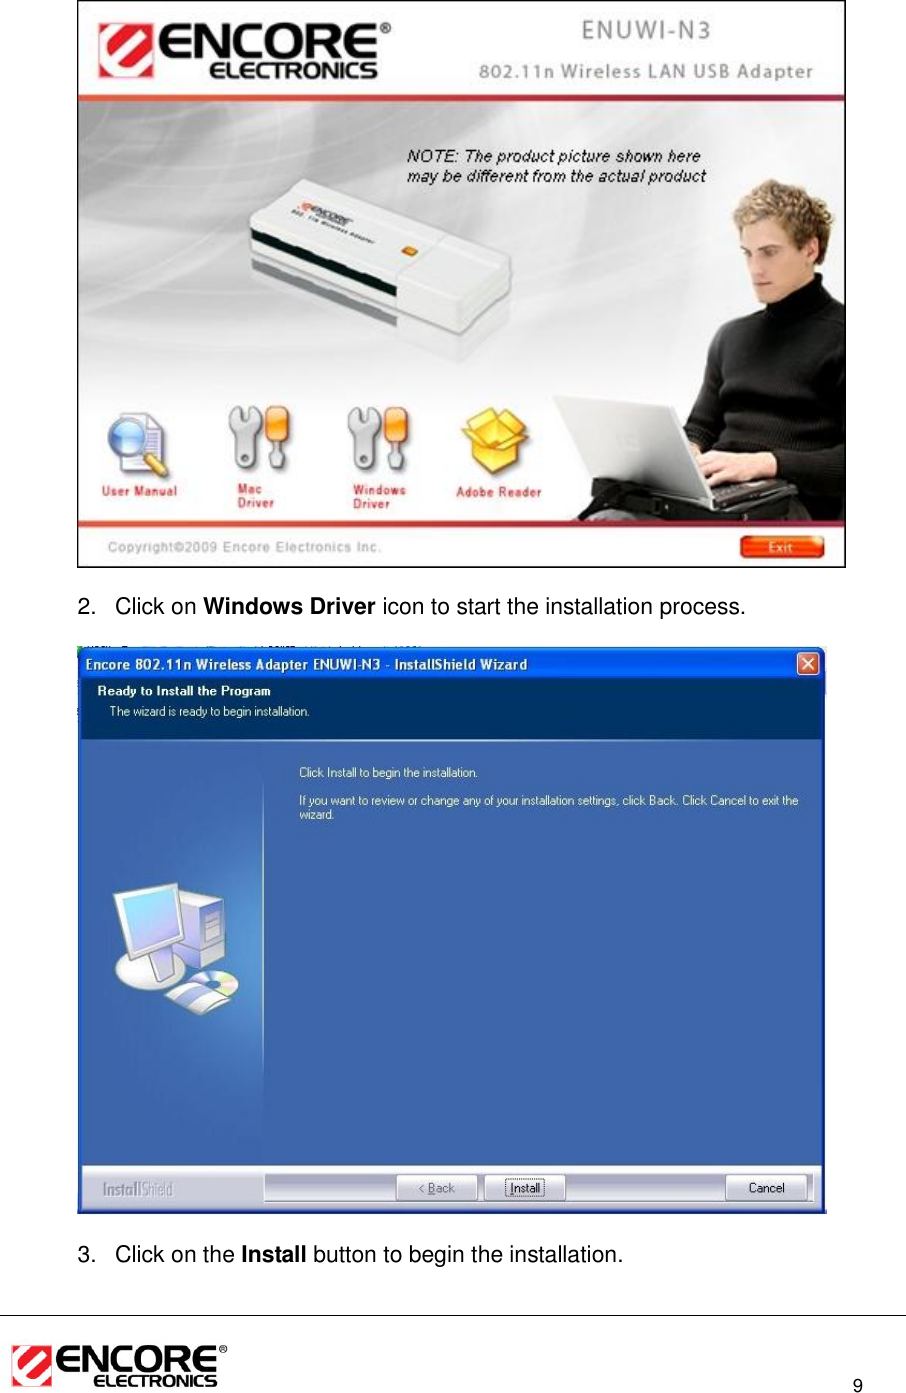                                                                                                                          9    2.  Click on Windows Driver icon to start the installation process.    3.  Click on the Install button to begin the installation.   